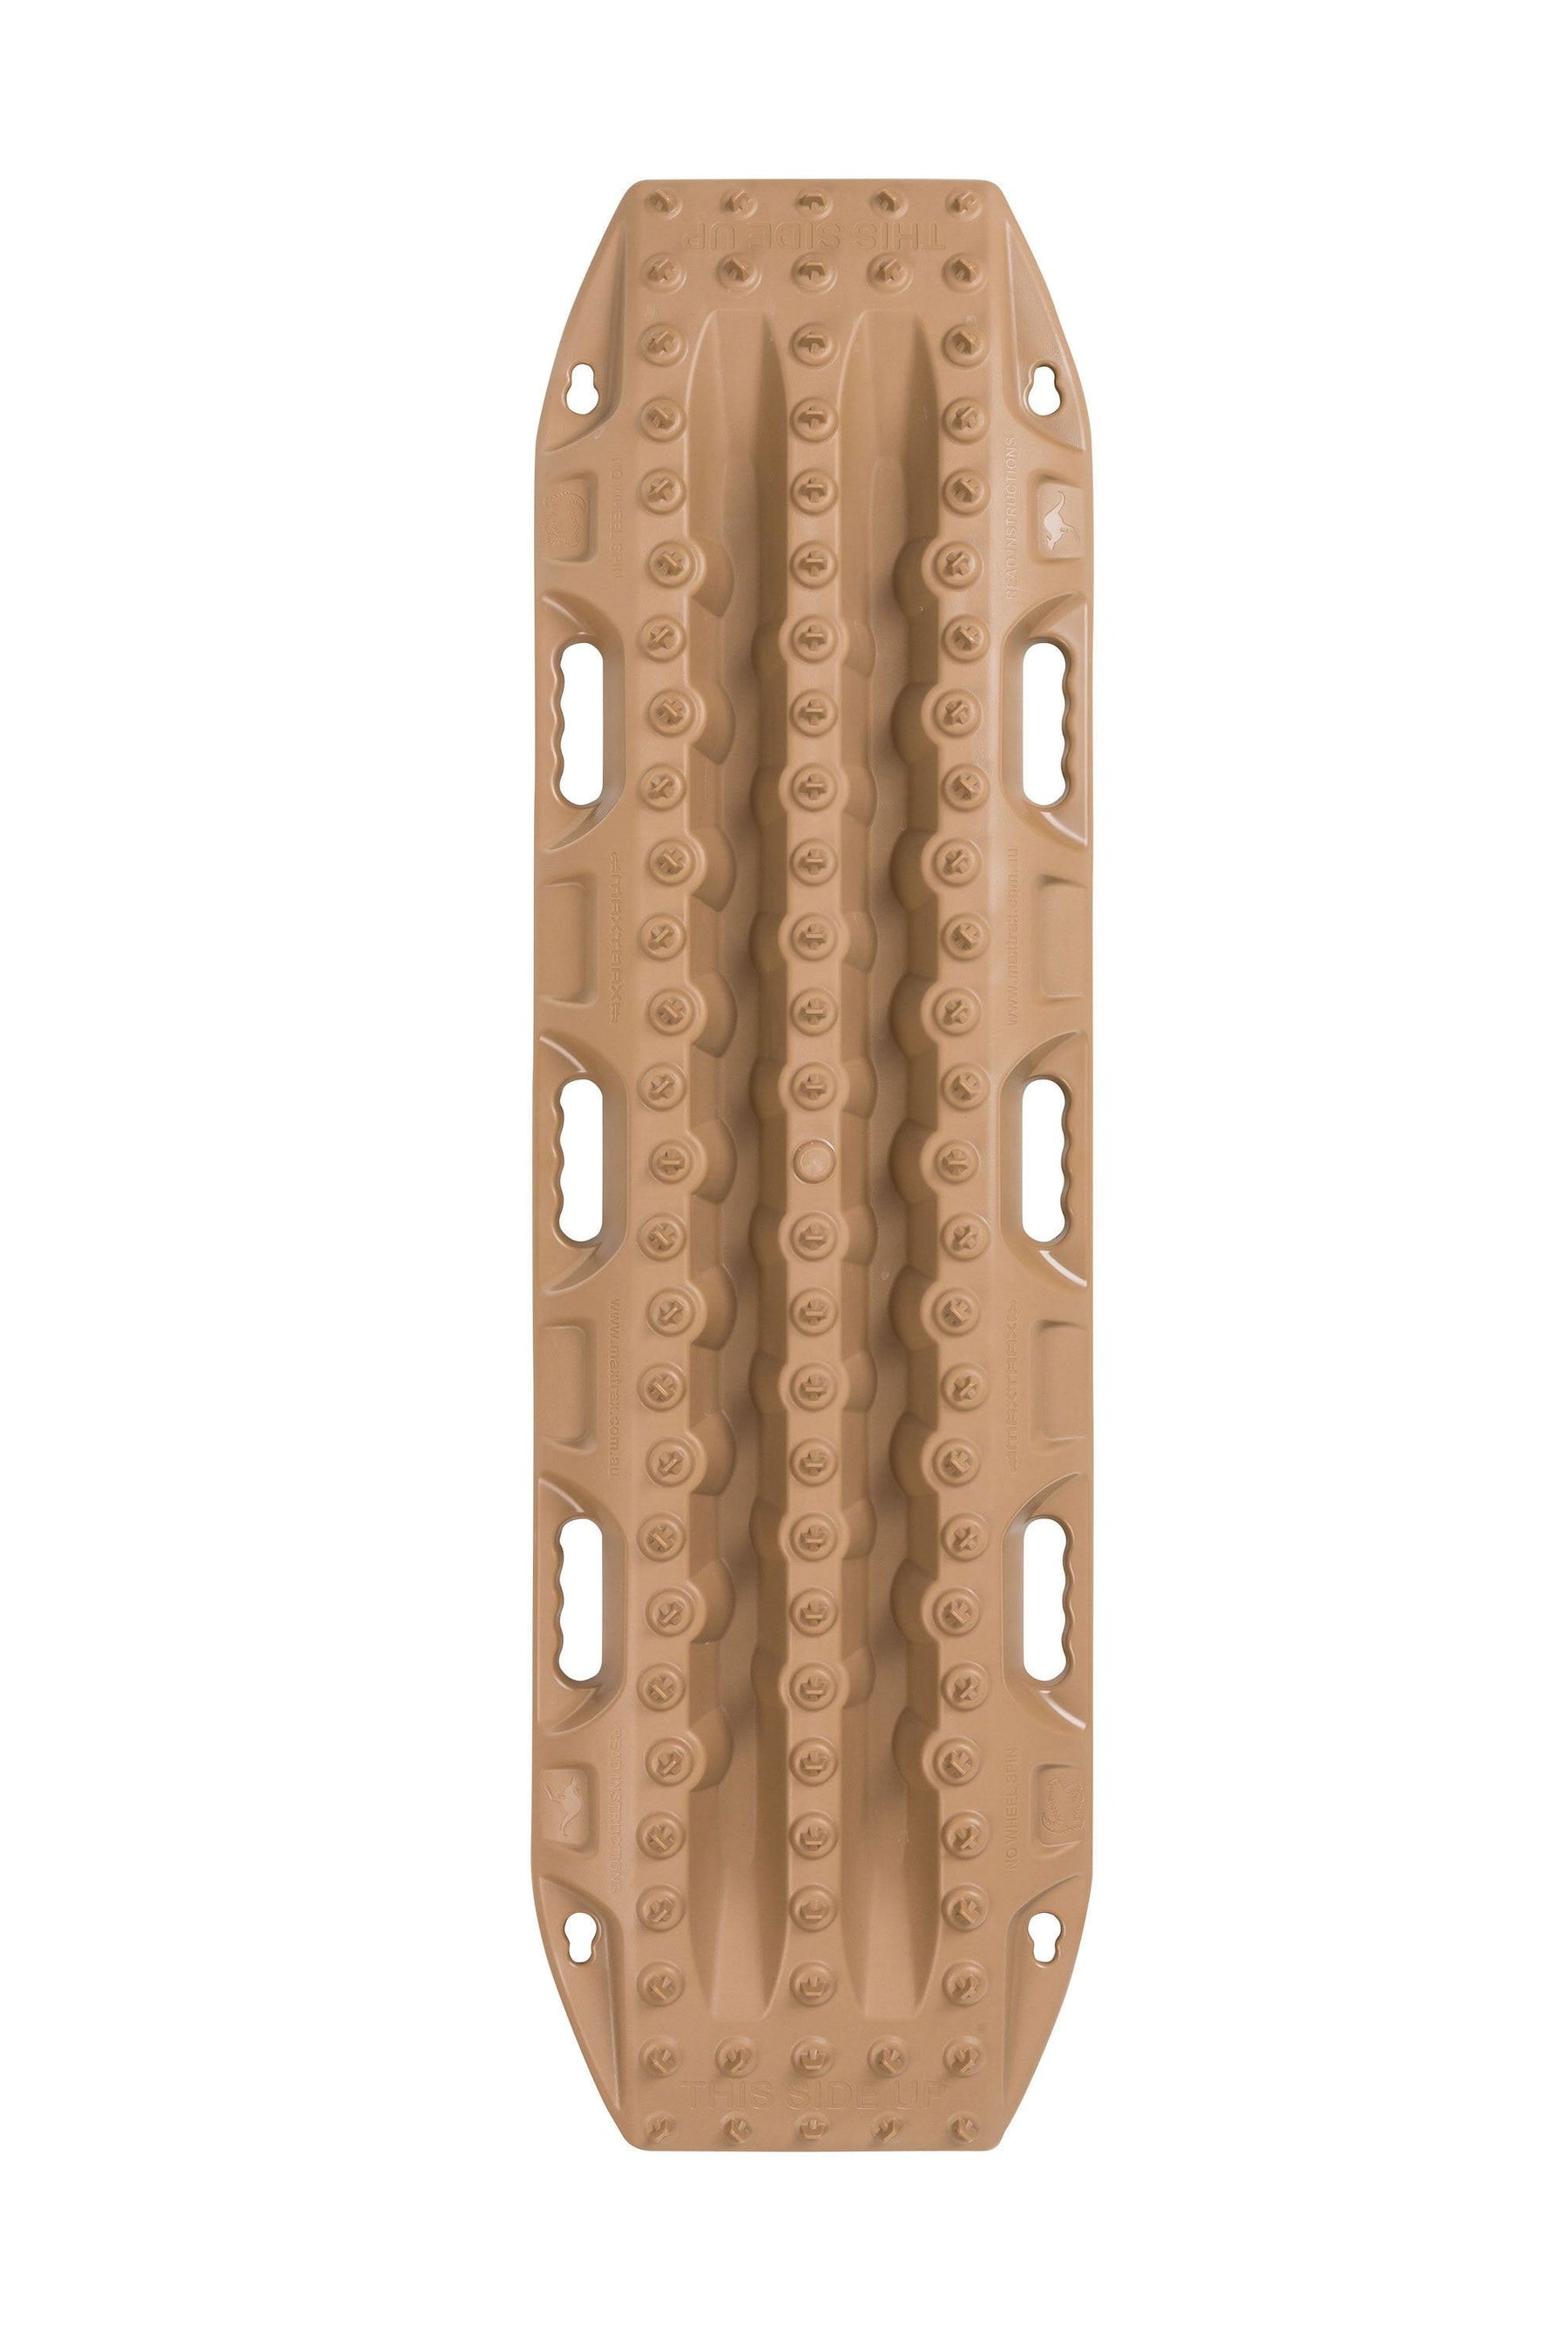 MAXTRAX MKII Desert Tan Recovery Boards  Recovery Gear MAXTRAX- Adventure Imports